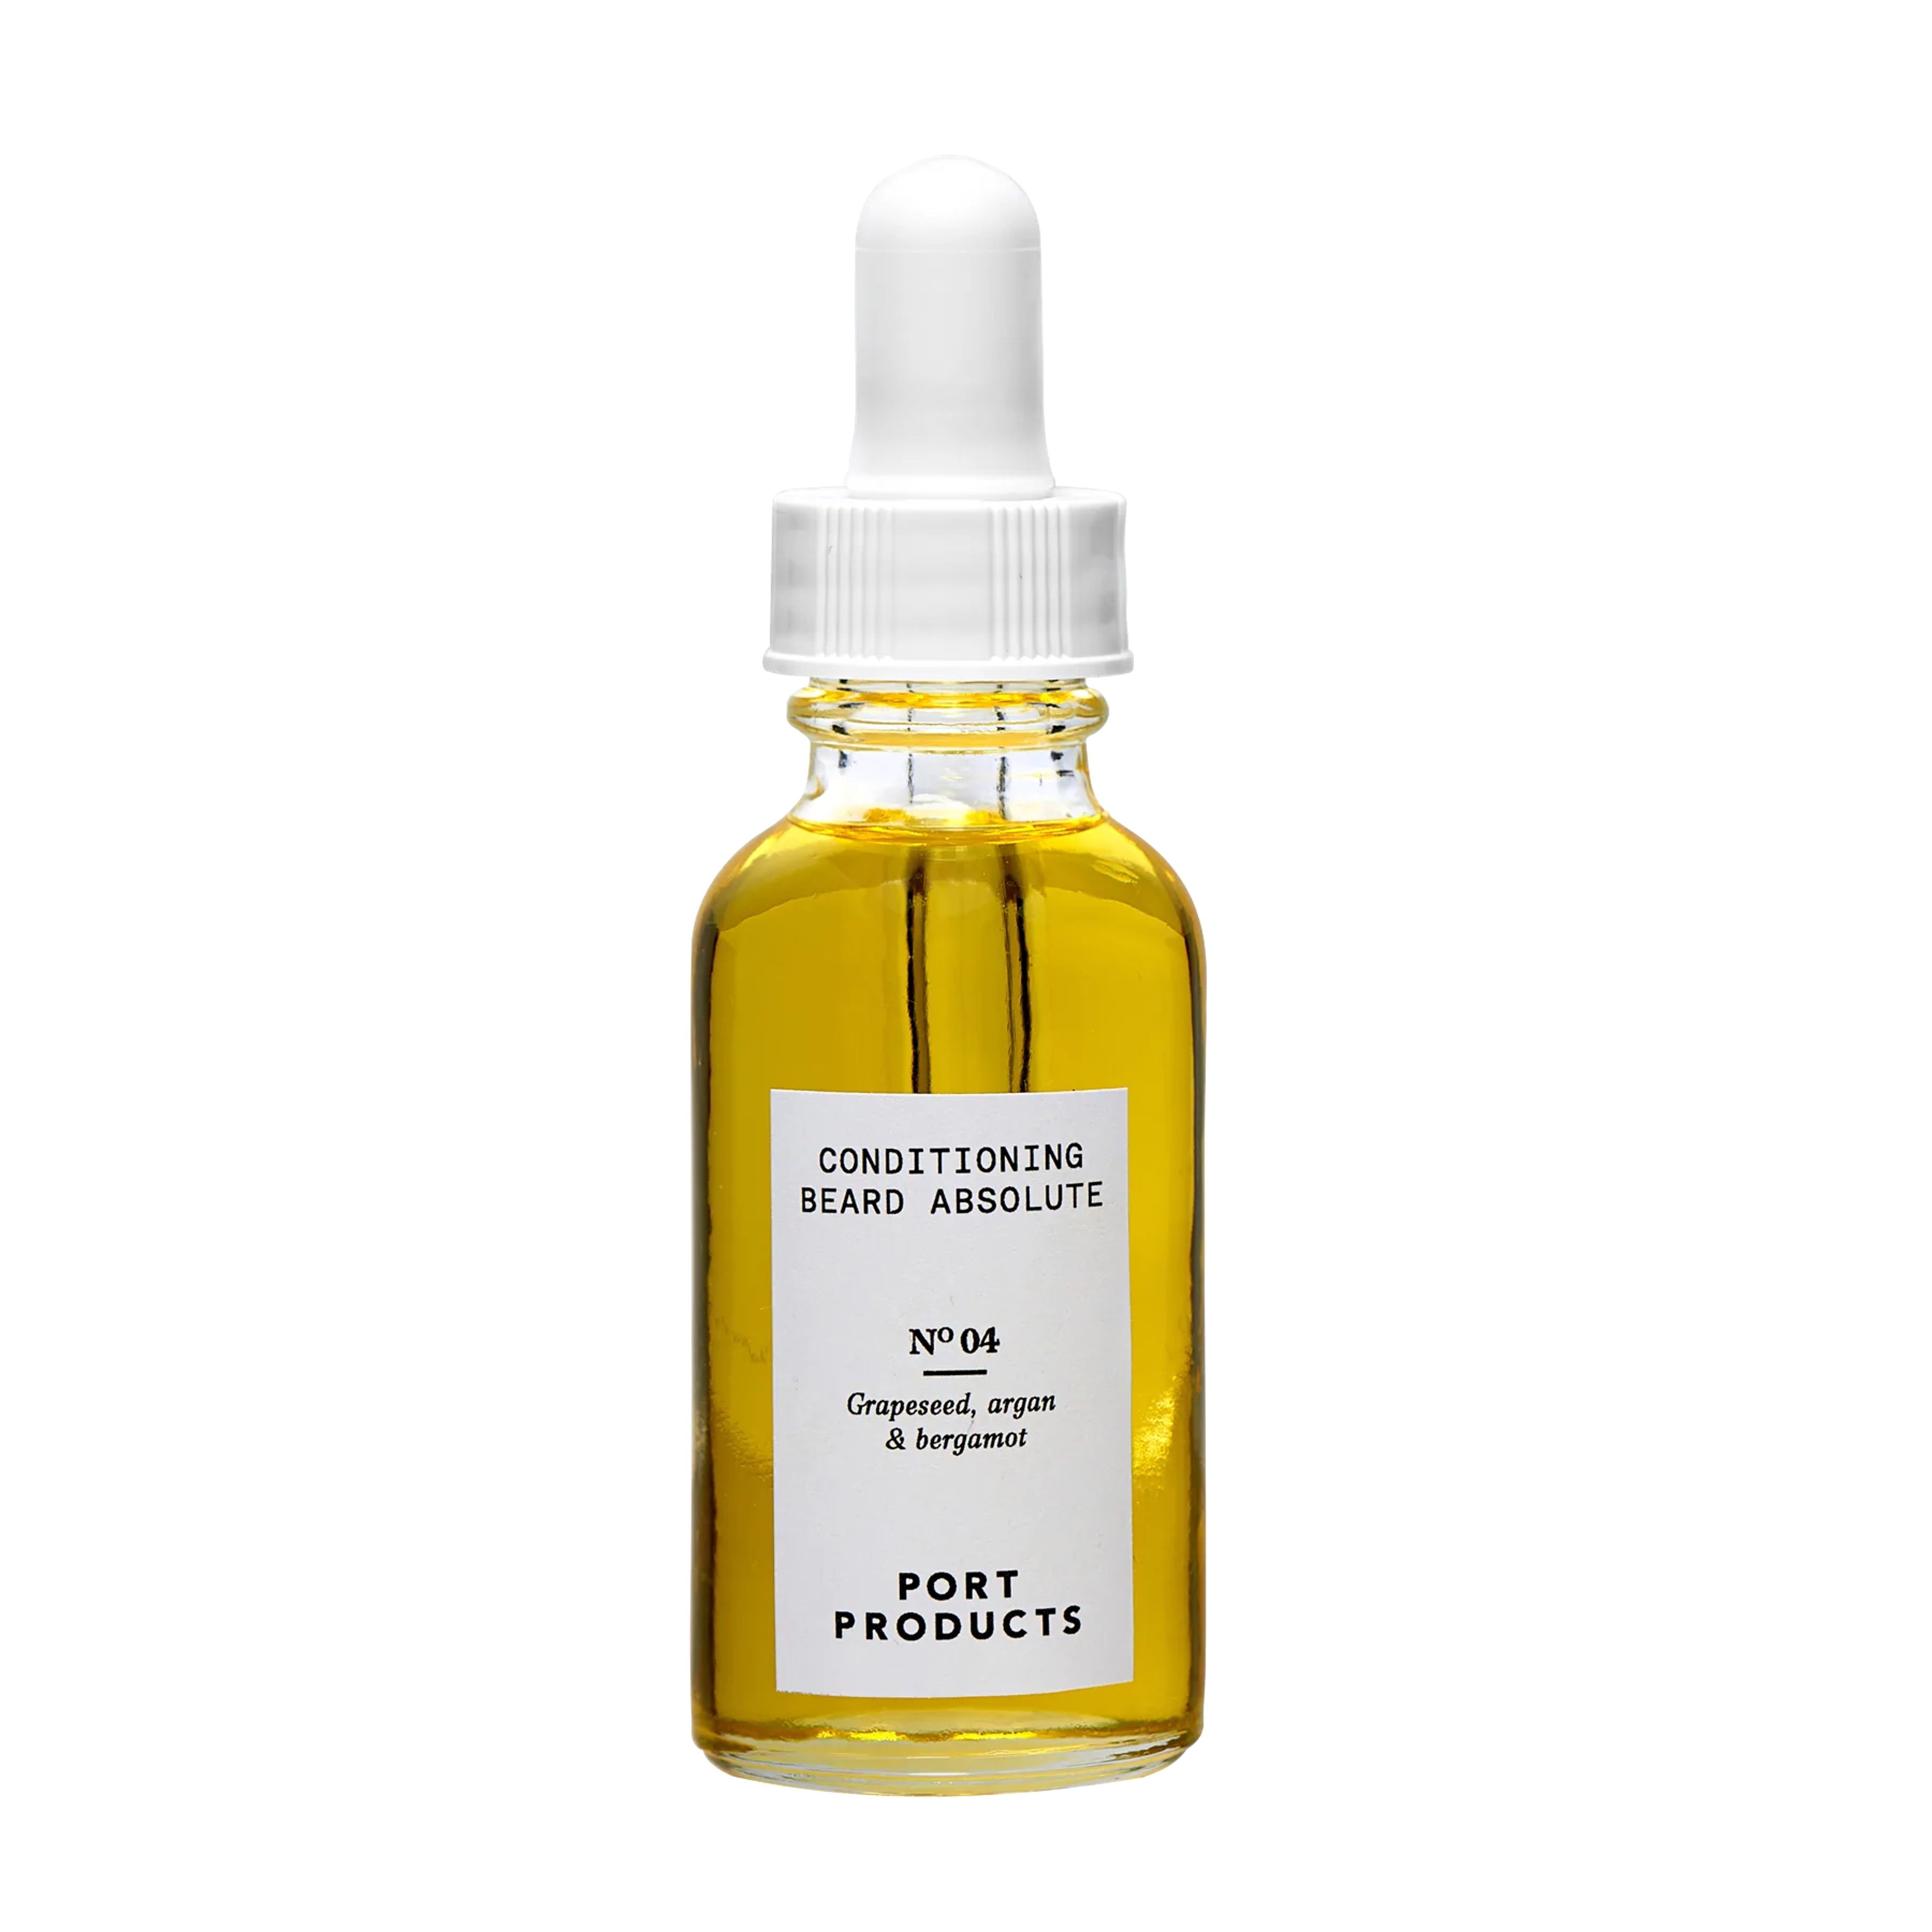 Conditioning Beard Absolute (Auto-Refill & Save)